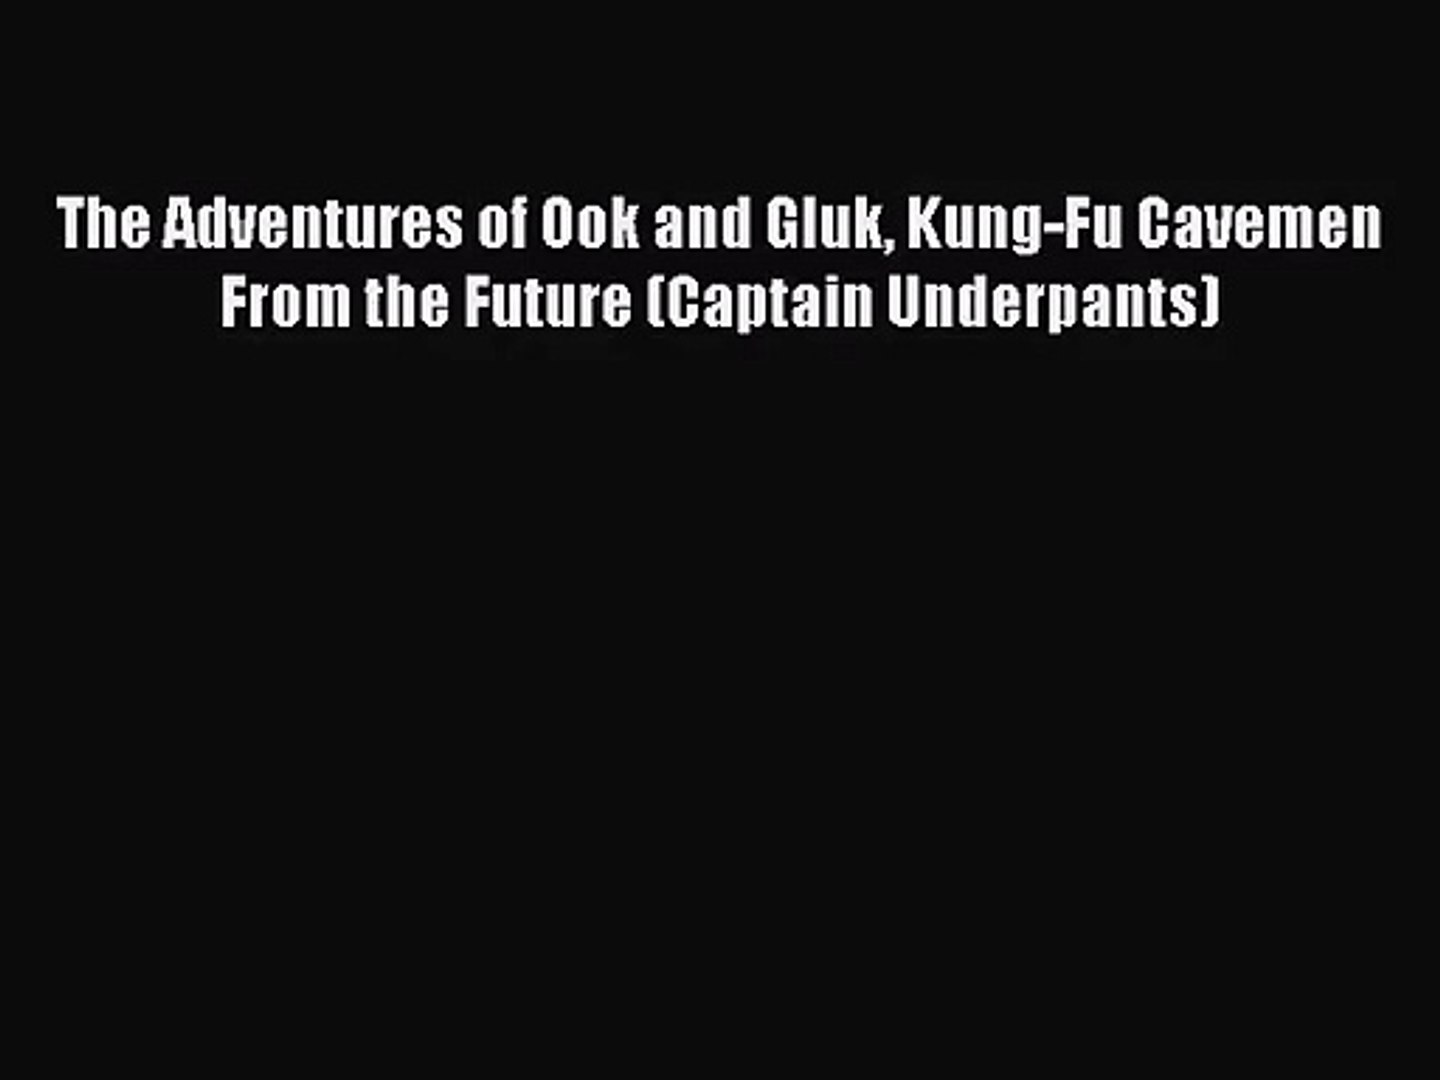 Pdf Download The Adventures Of Ook And Gluk Kung Fu Cavemen From The Future Captain Underpants Video Dailymotion - скачать captain underpants roblox adventure 2 смотреть